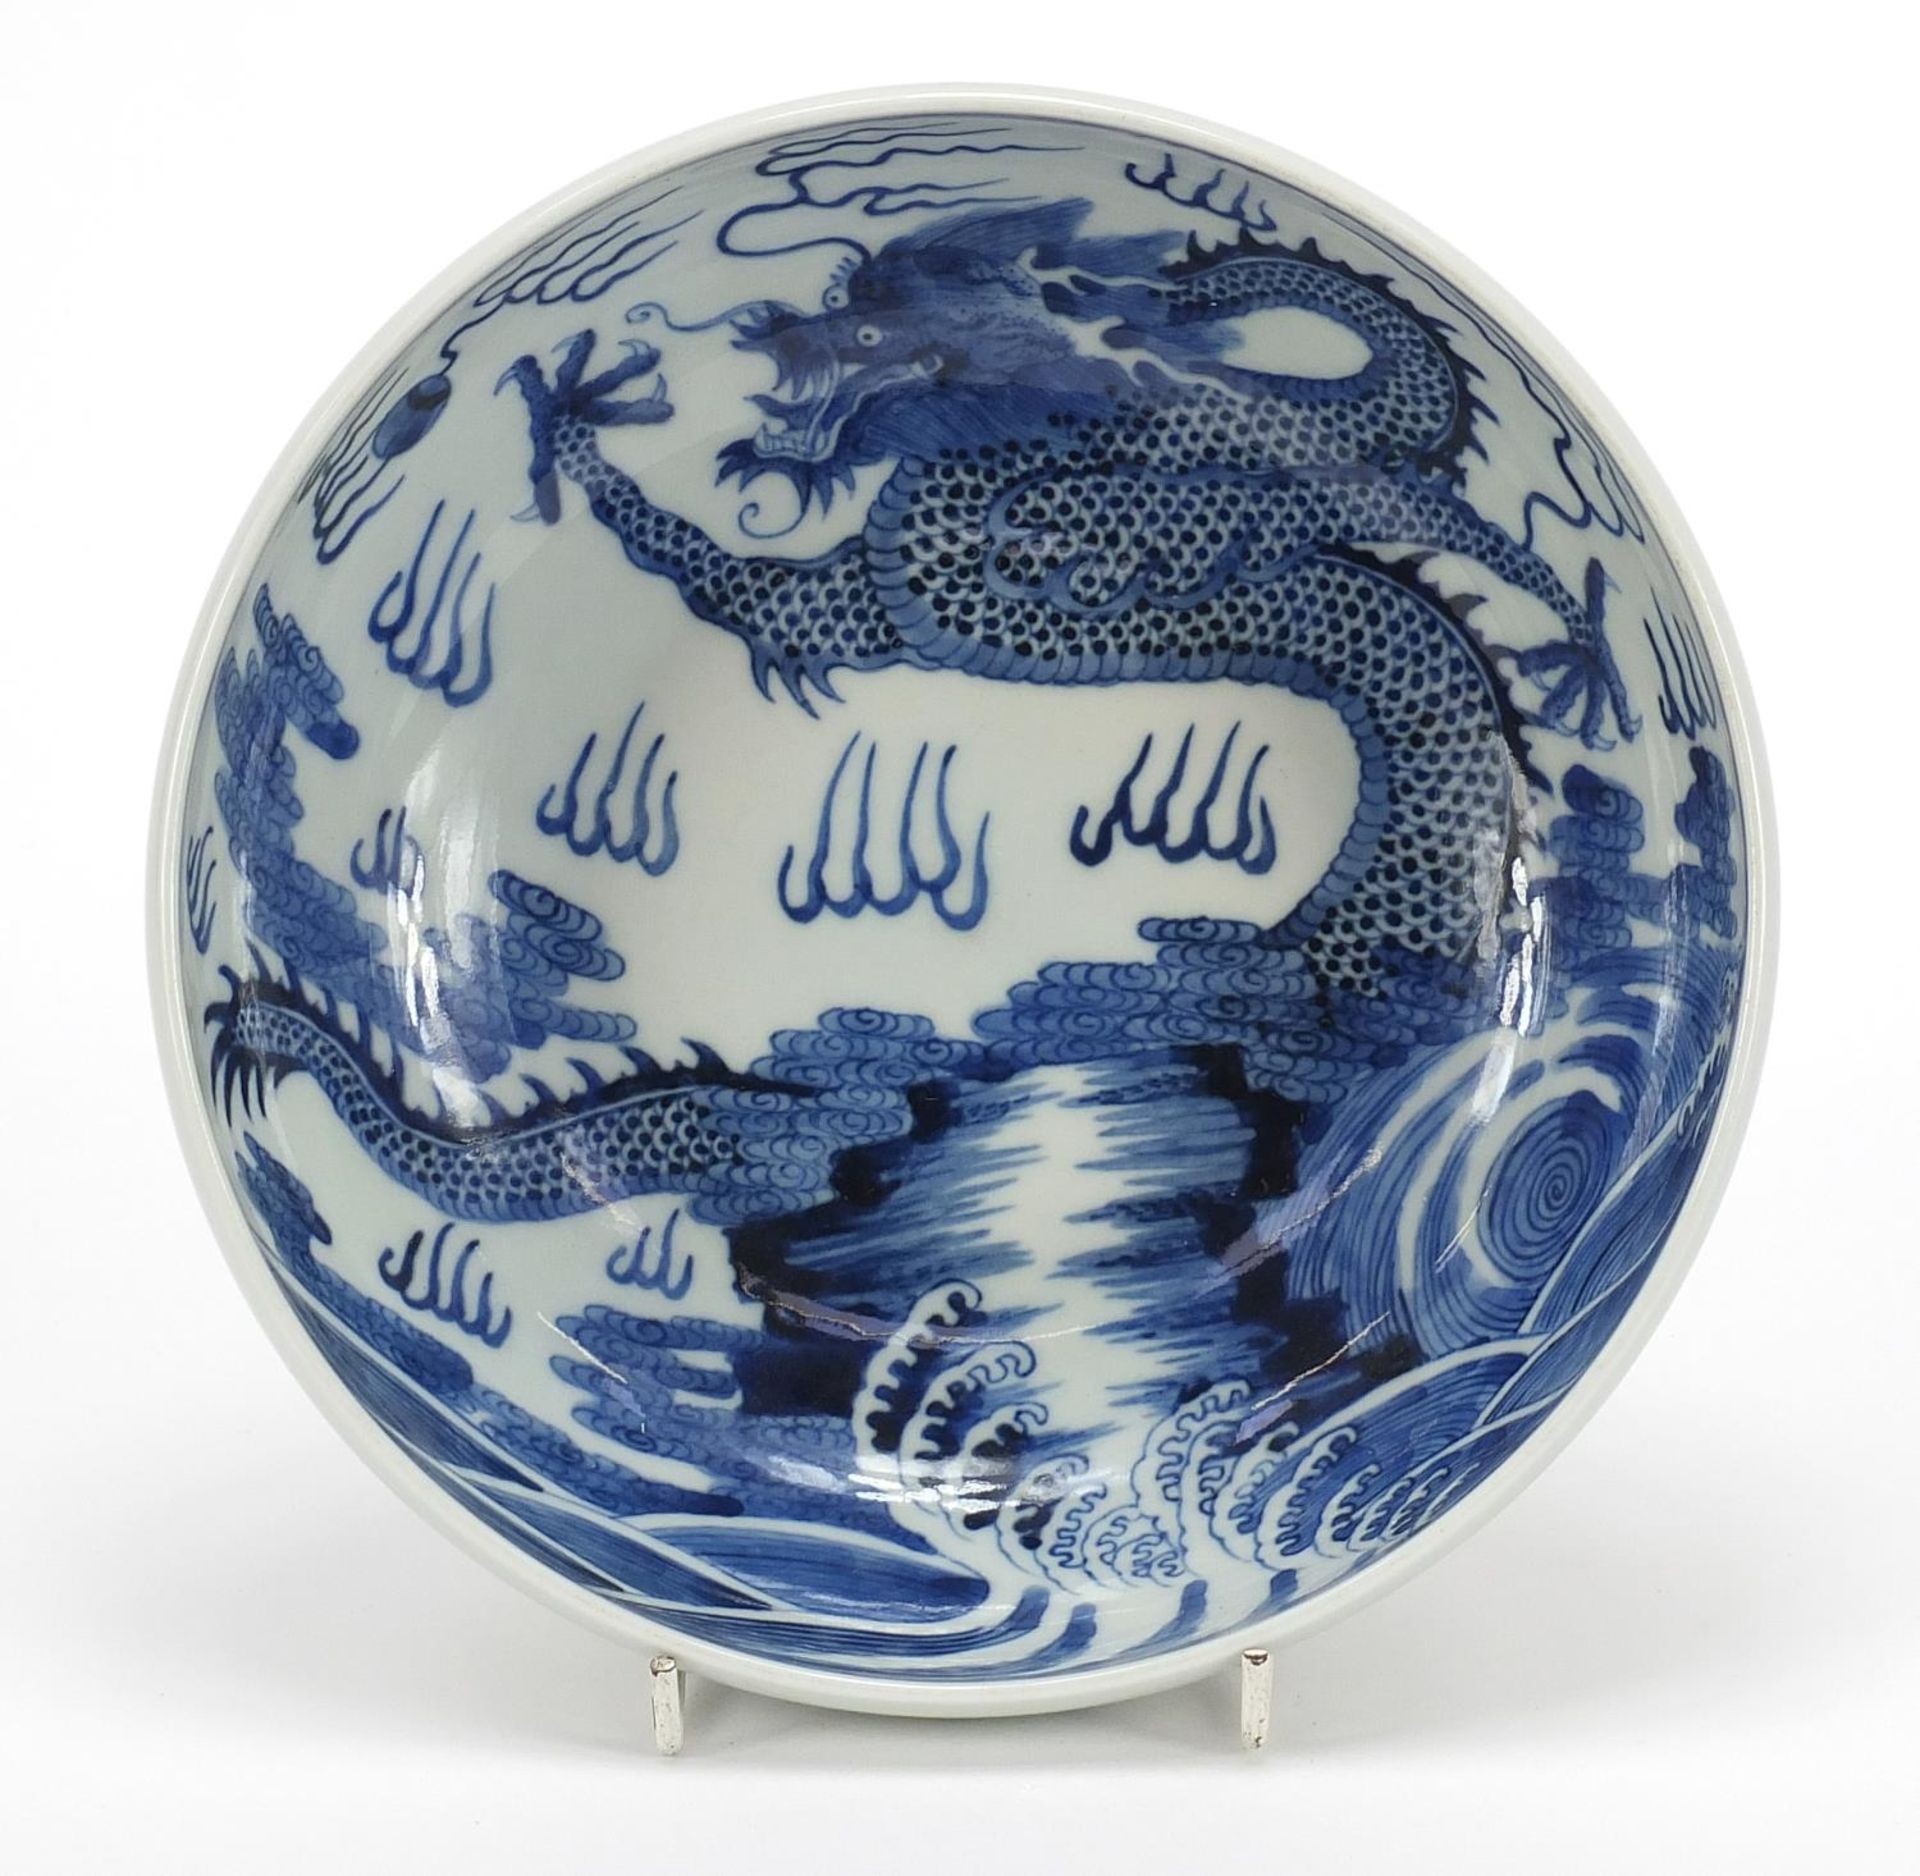 Chinese blue and white porcelain bowl hand painted with a dragon amongst clouds above waves, blue